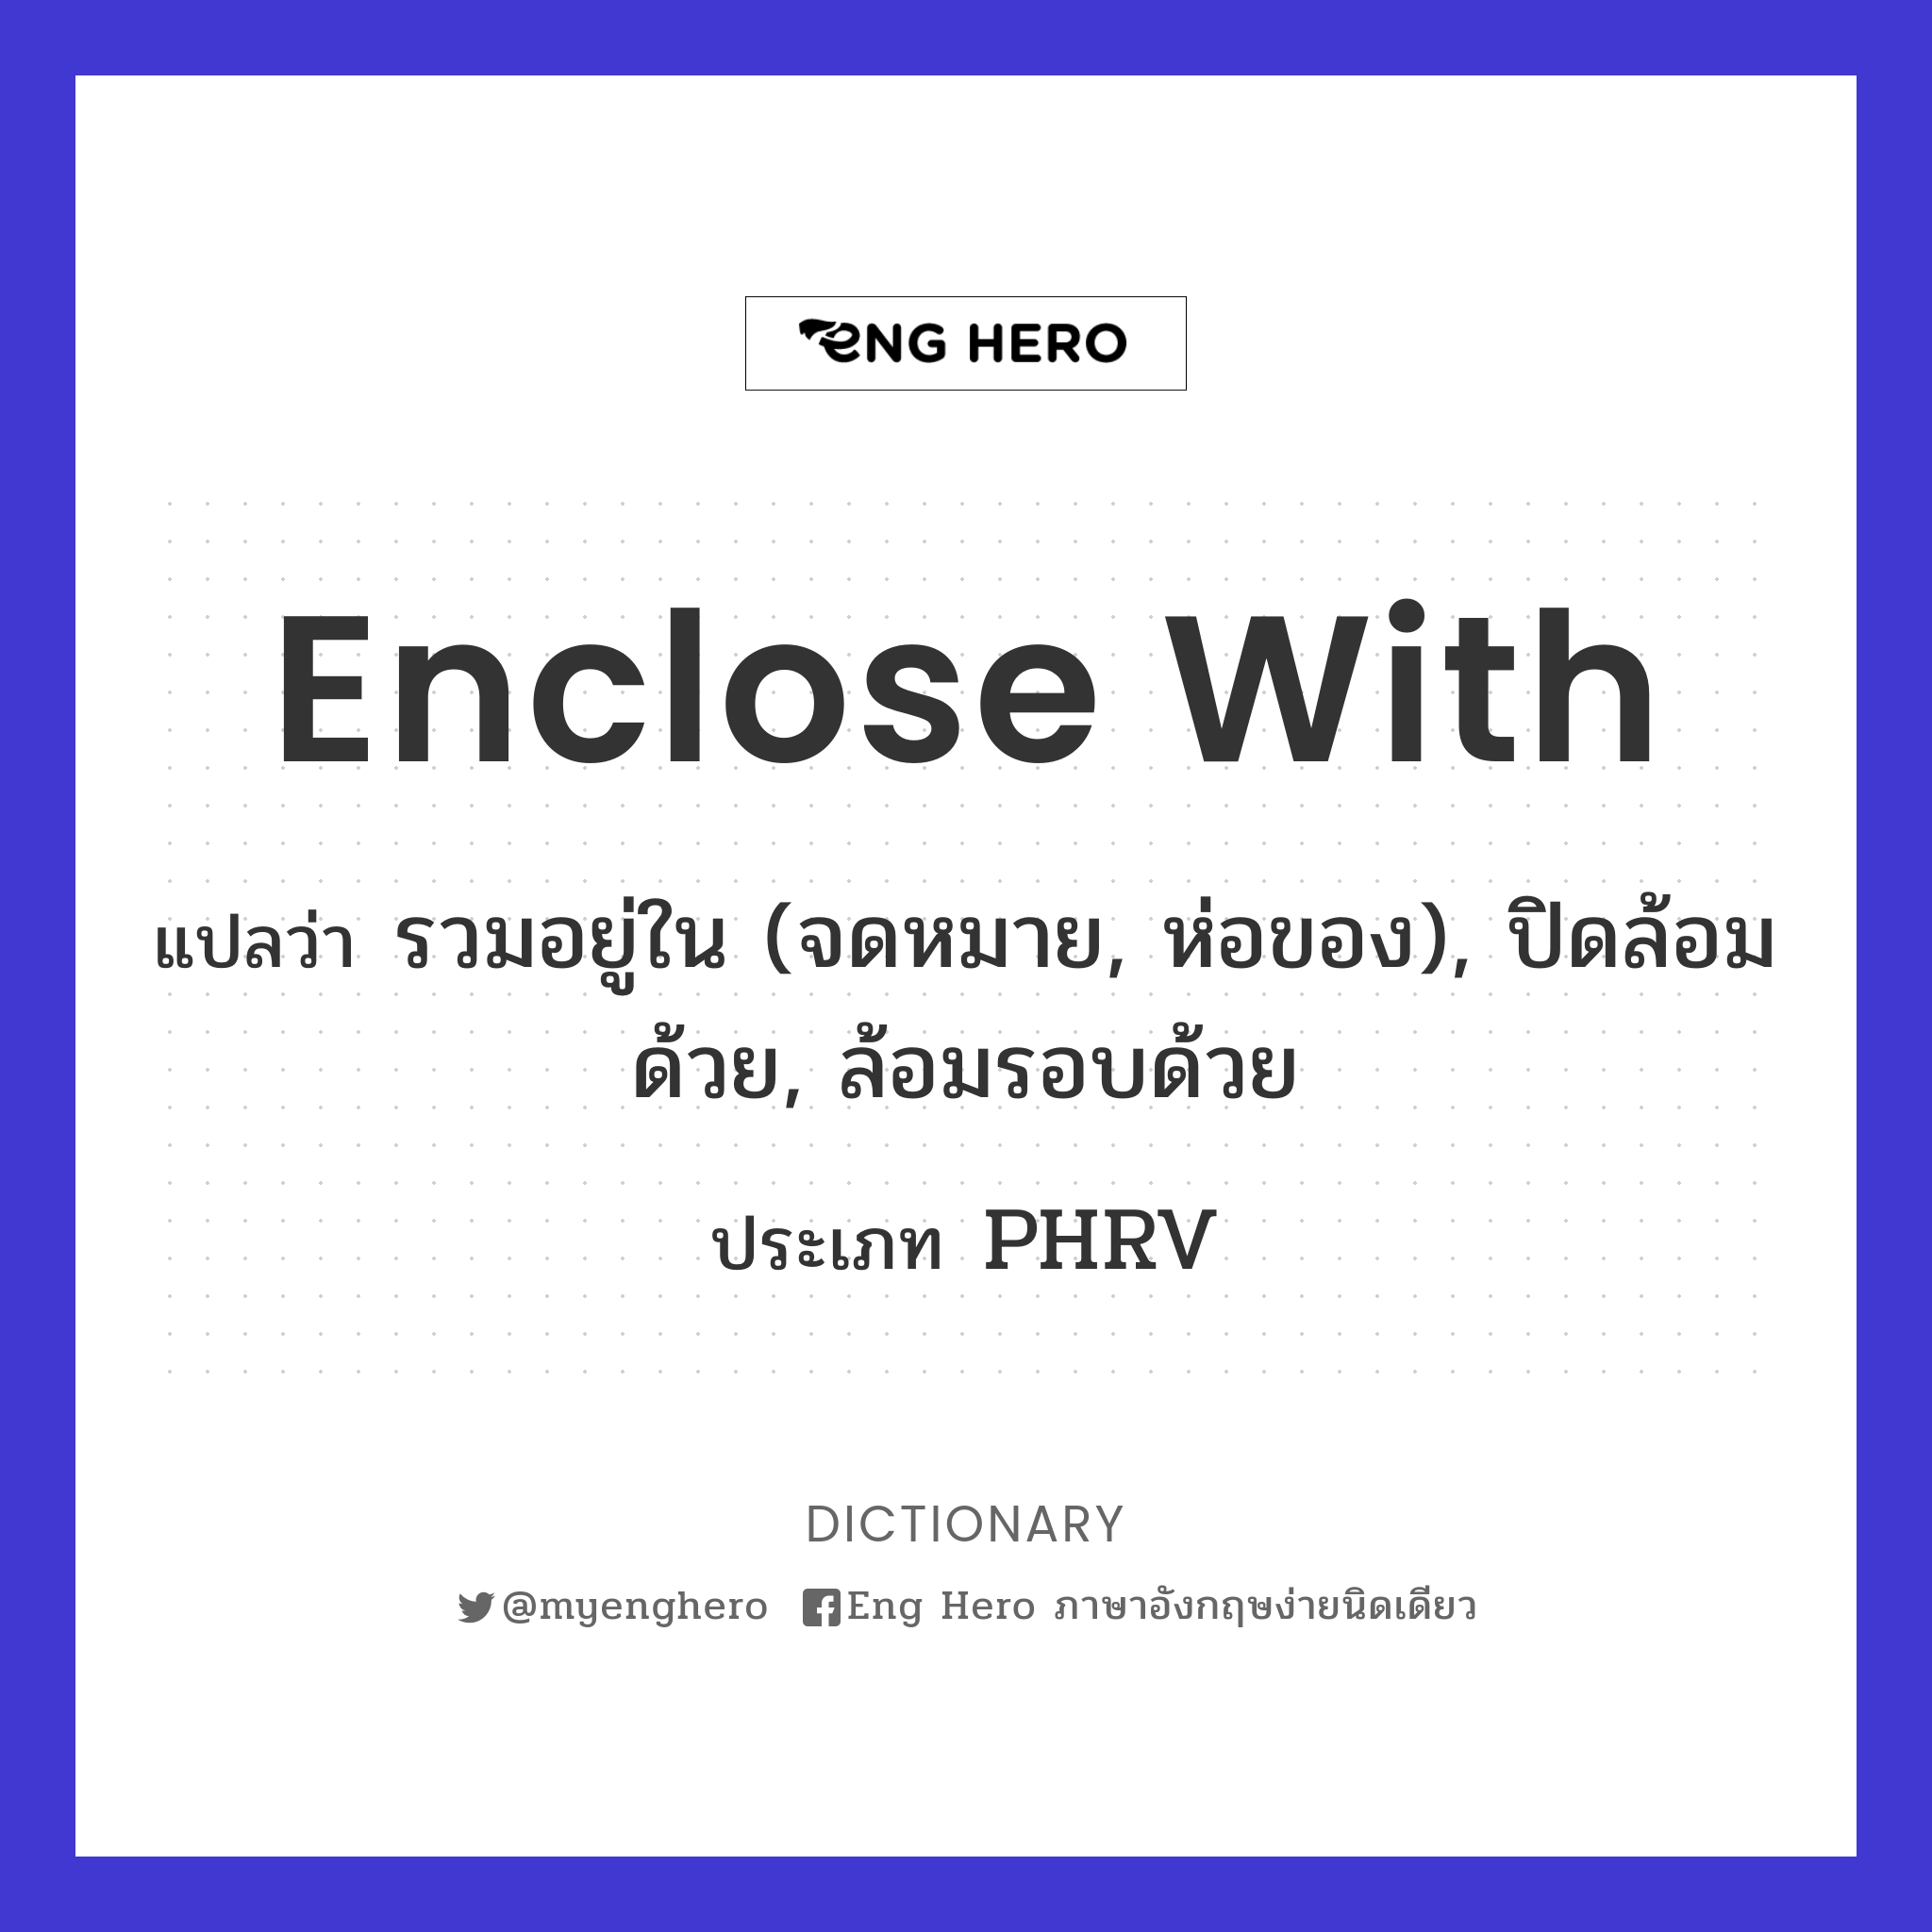 enclose with